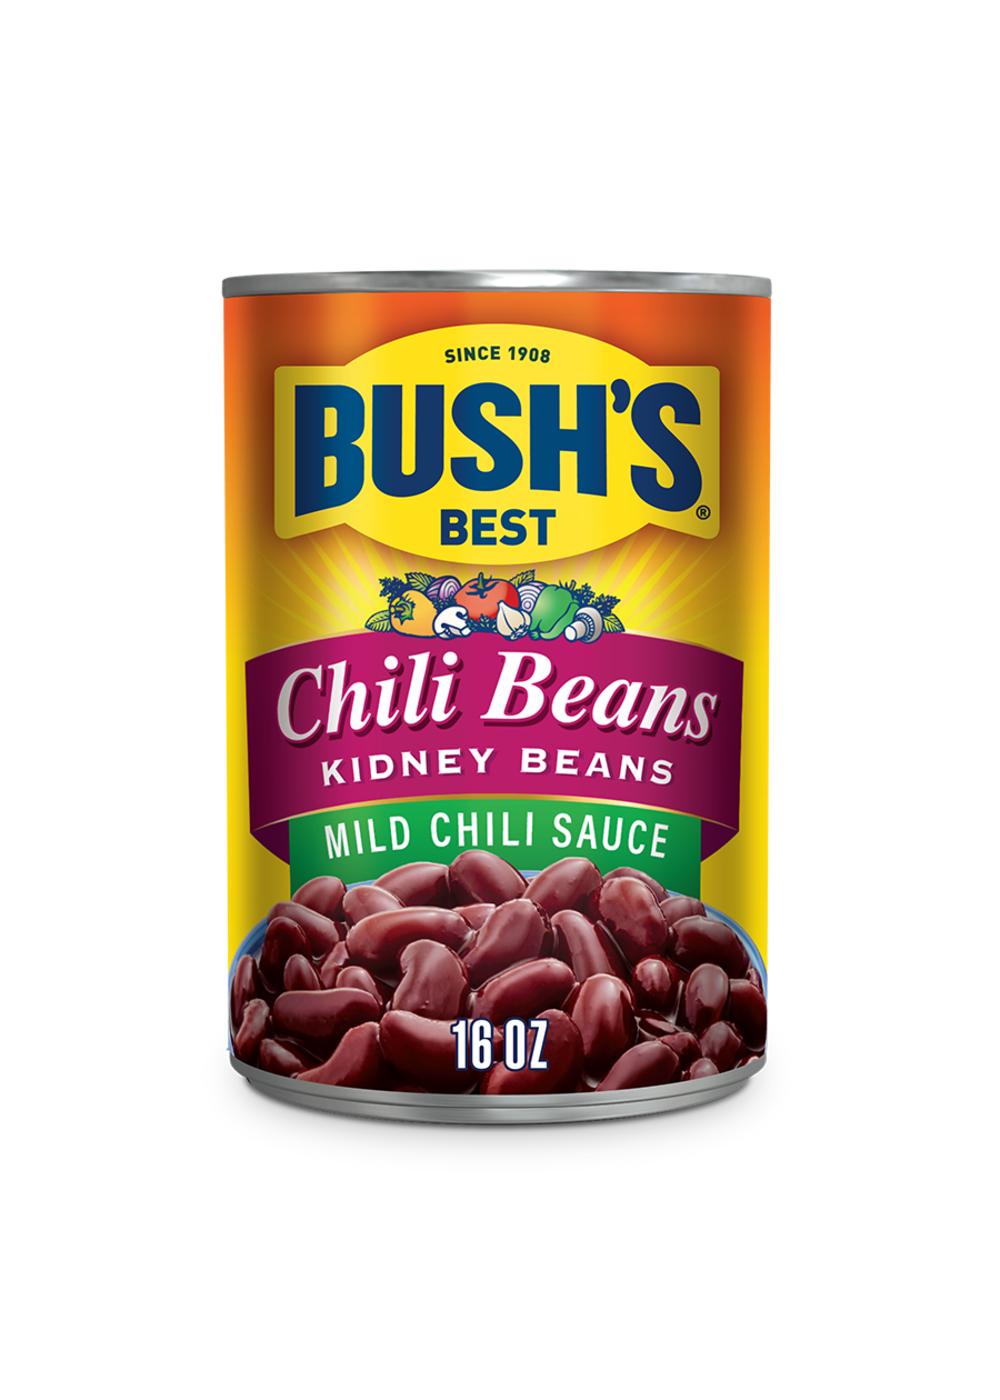 Bush's Best Kidney Beans in a Mild Chili Sauce; image 1 of 5